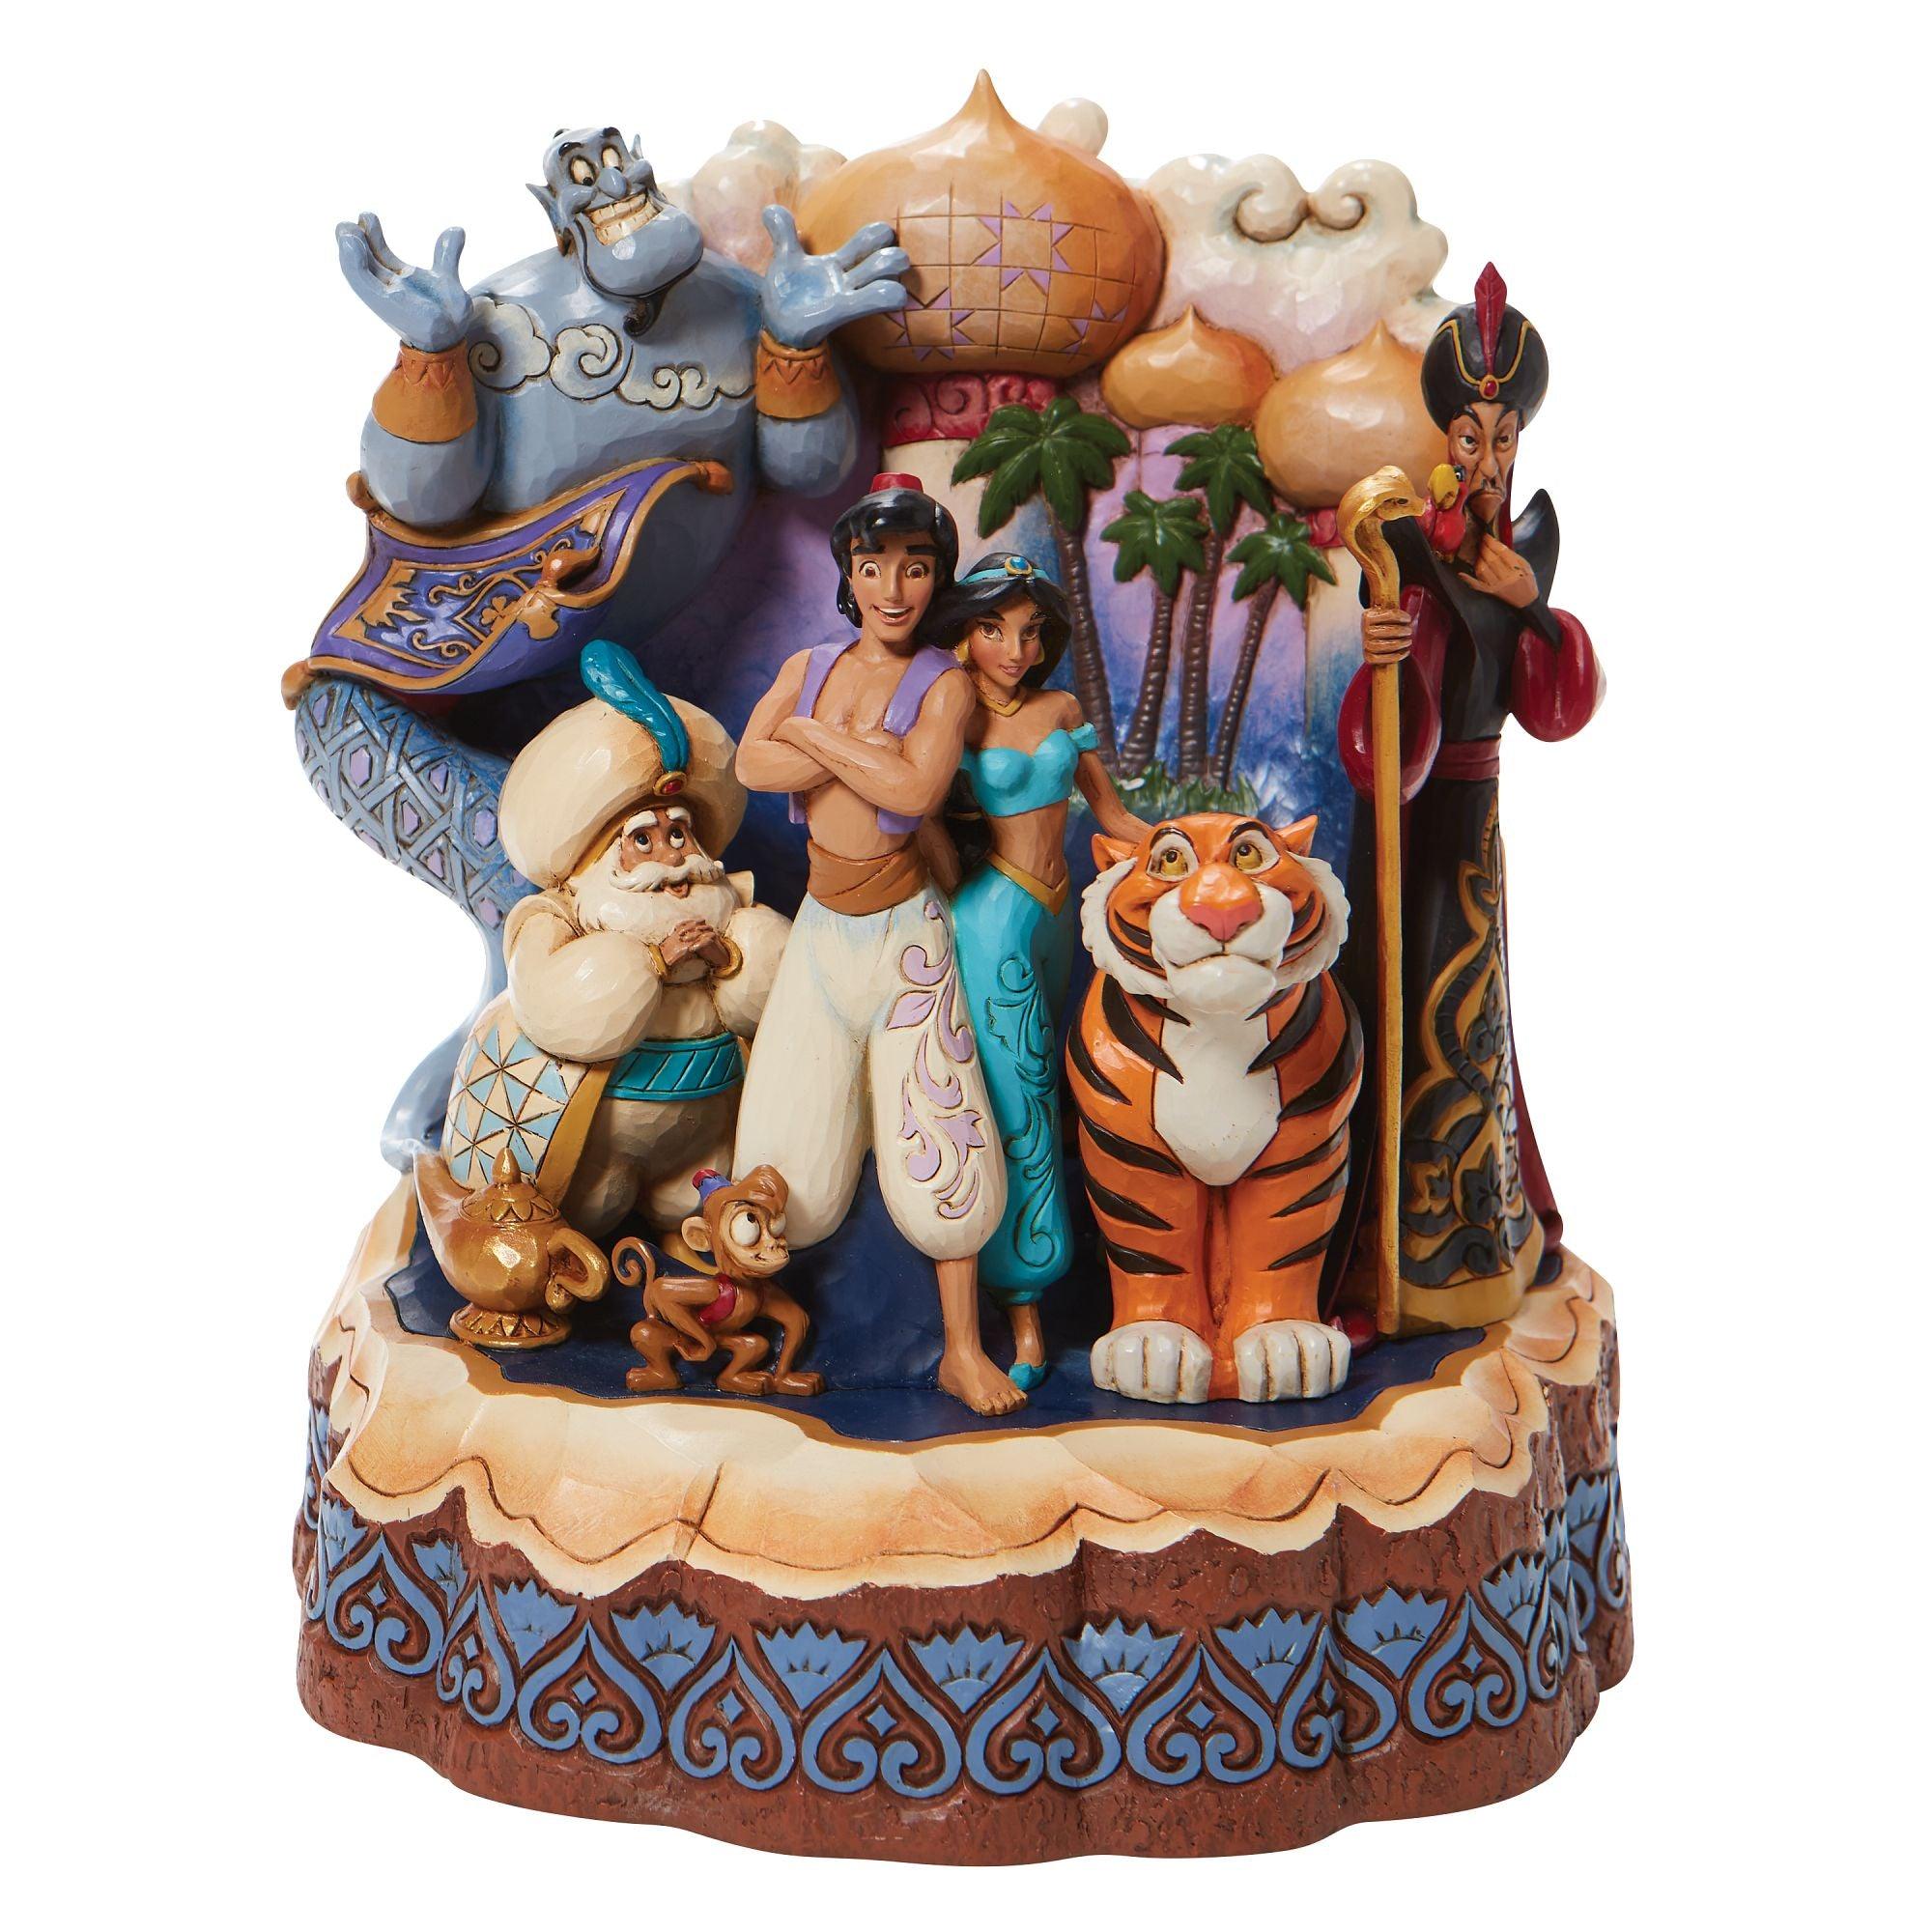 A Wondrous Place (Carved by Heart Aladdin) by Disney Traditions